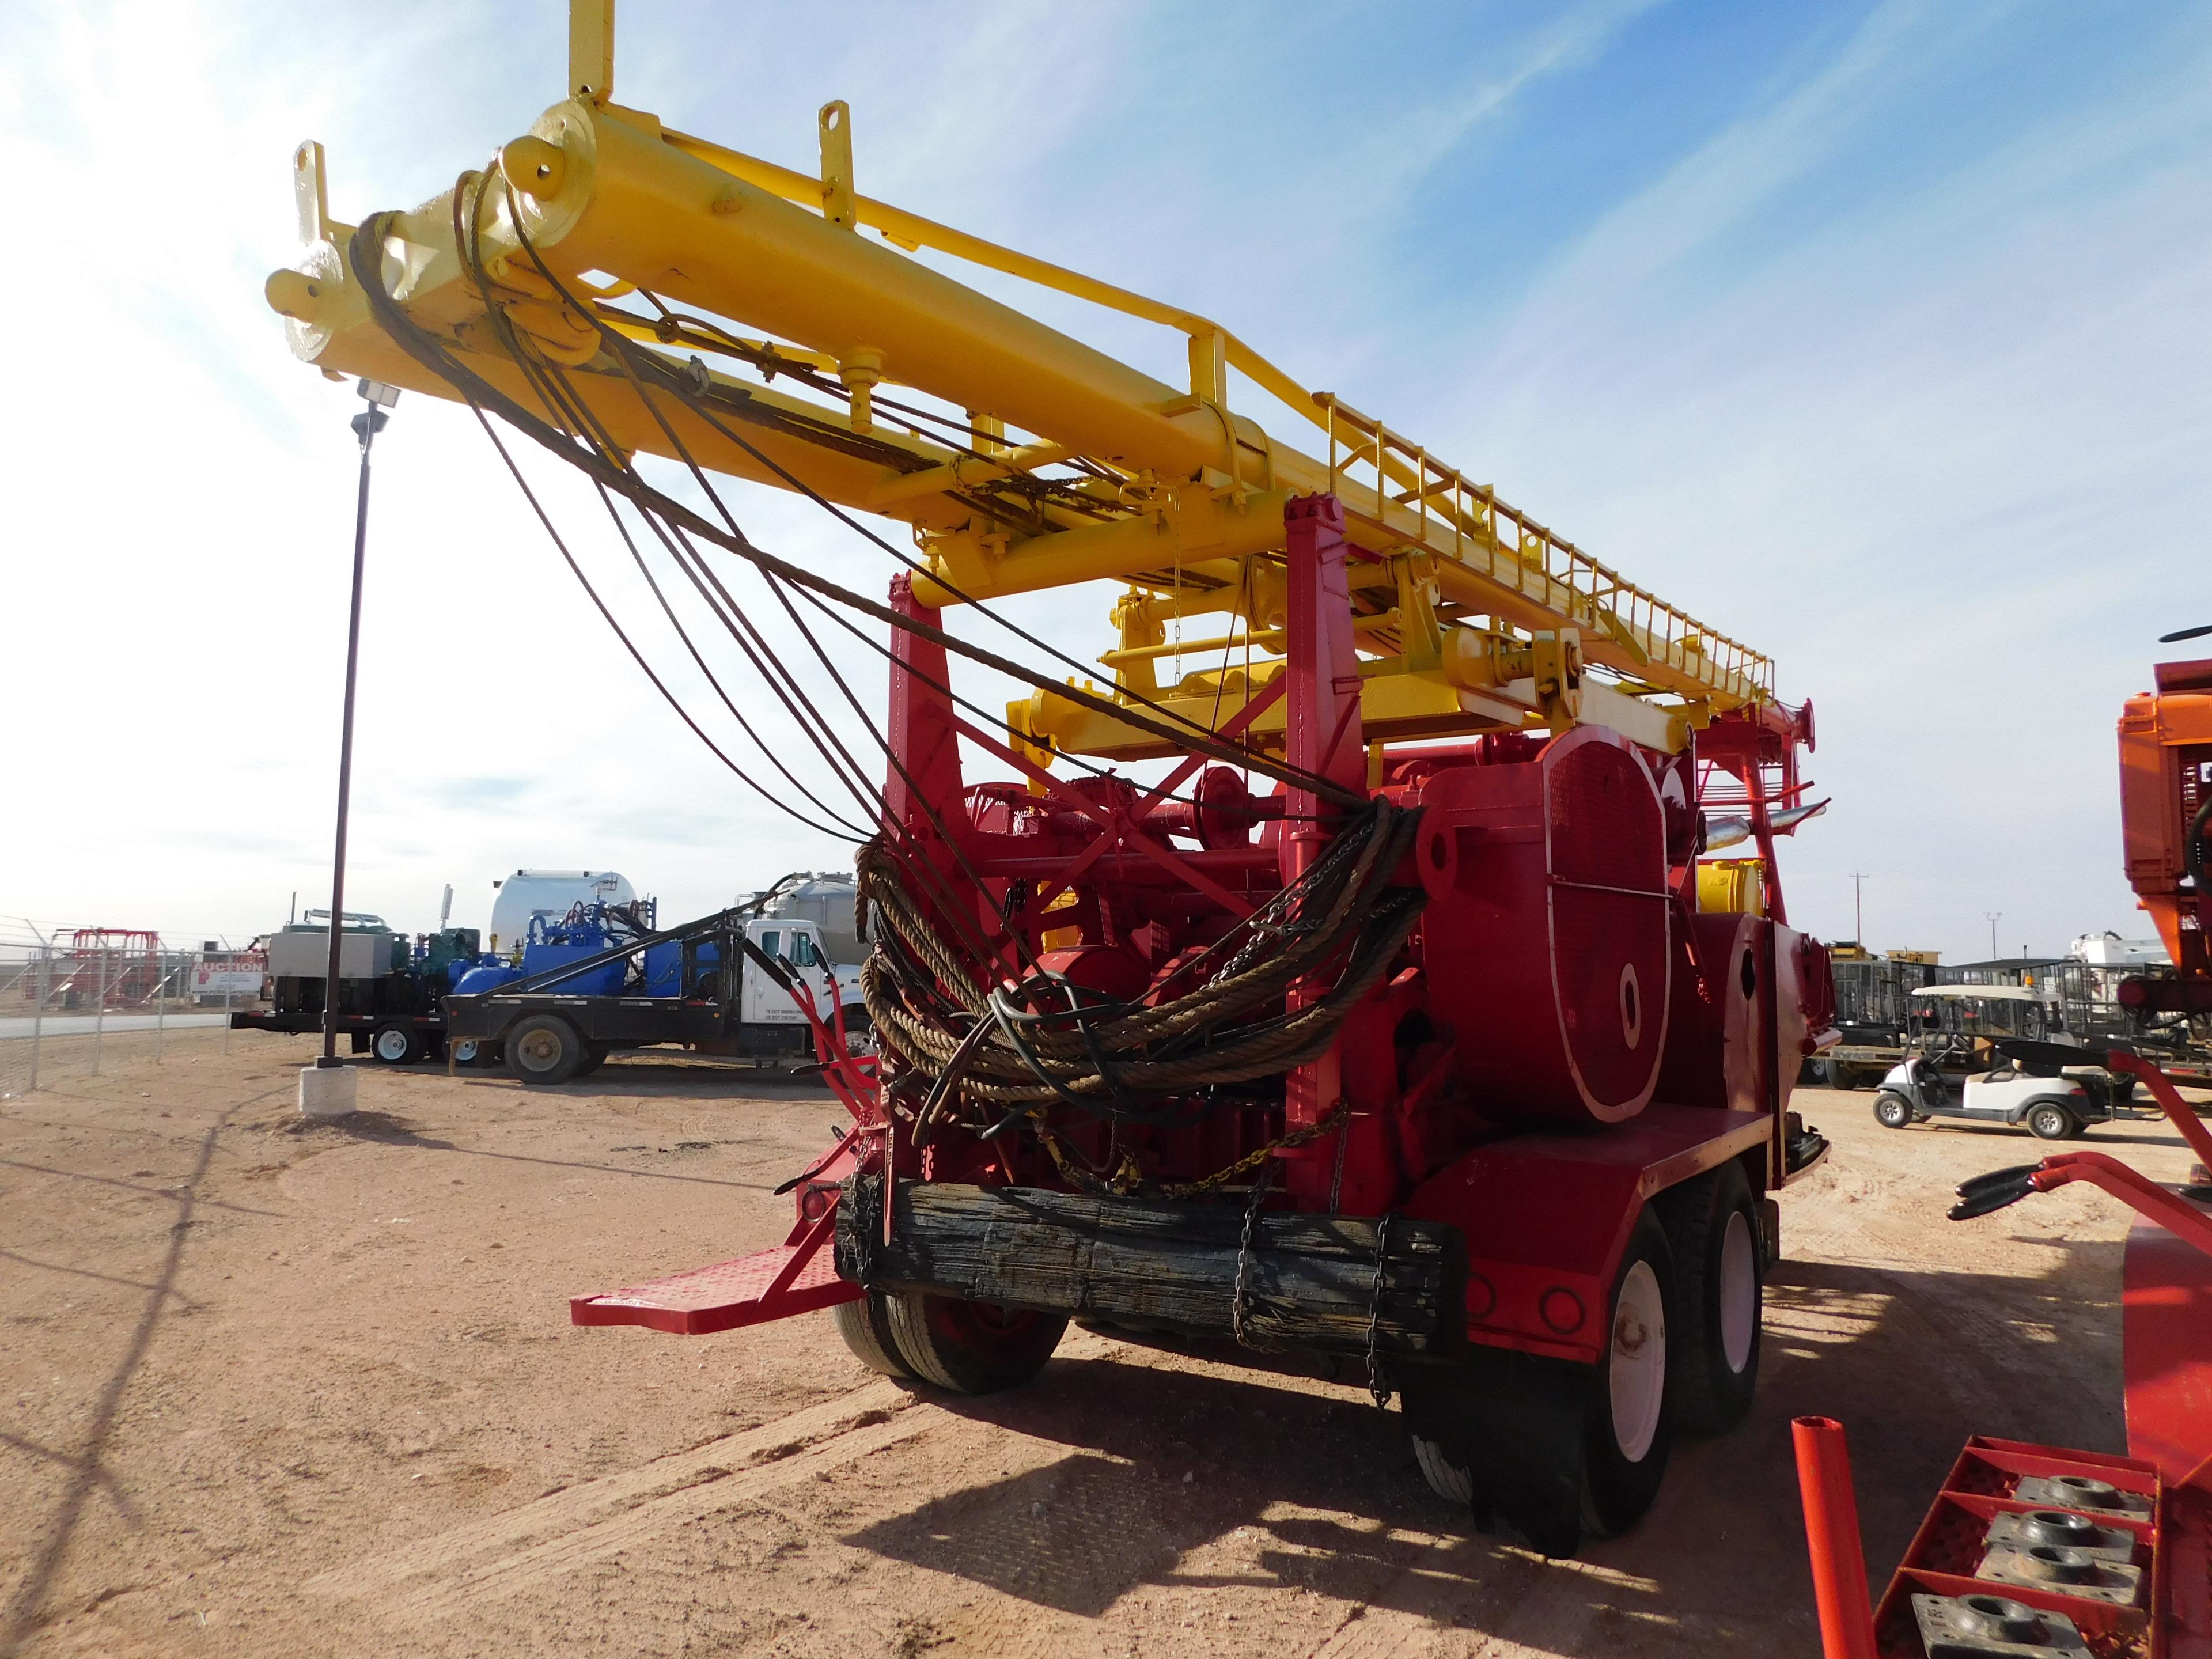 Located in YARD 1 - Midland, TX (9248) 1951 WALKER NEER C-34 CABLE TOOL RIG W/